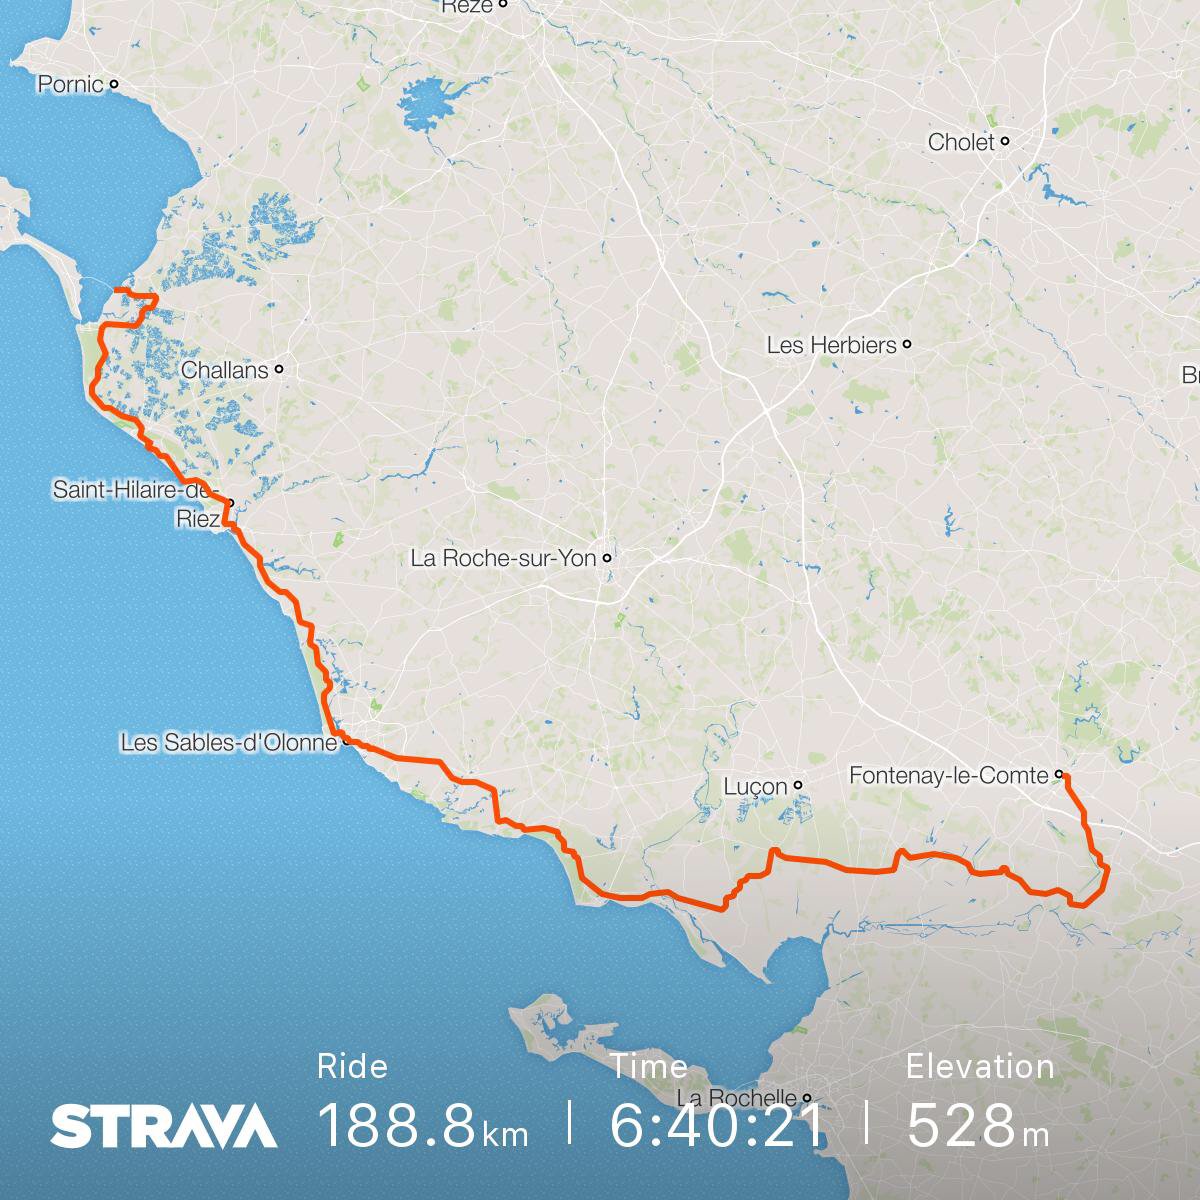 Well done to Priory Director of Operations James Kent, who this weekend cycled the first leg of the Tour de France in aid of @ProstateUK his fundraising group have now raised over £250,000!! #fundraising #cycling #proudtobepriory